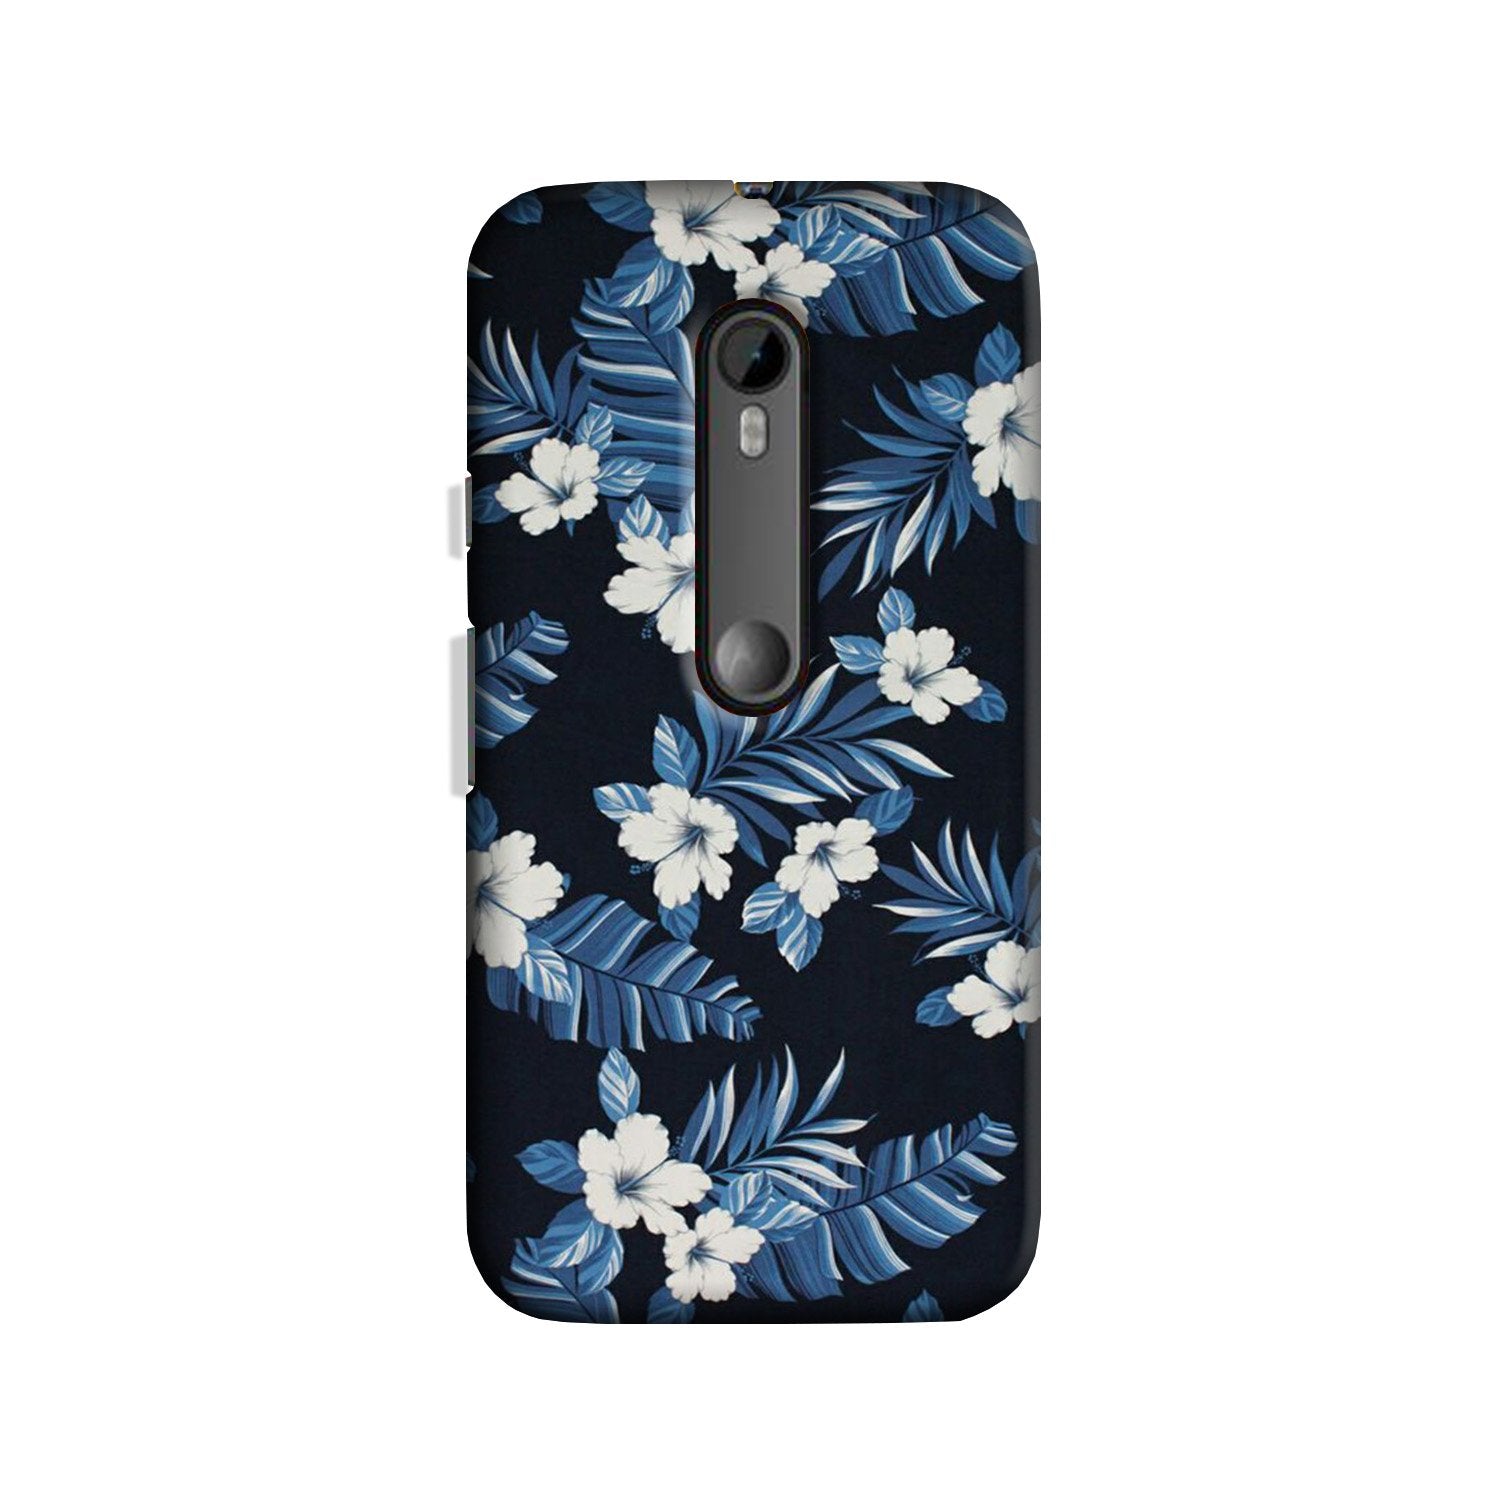 White flowers Blue Background2 Case for Moto X Style